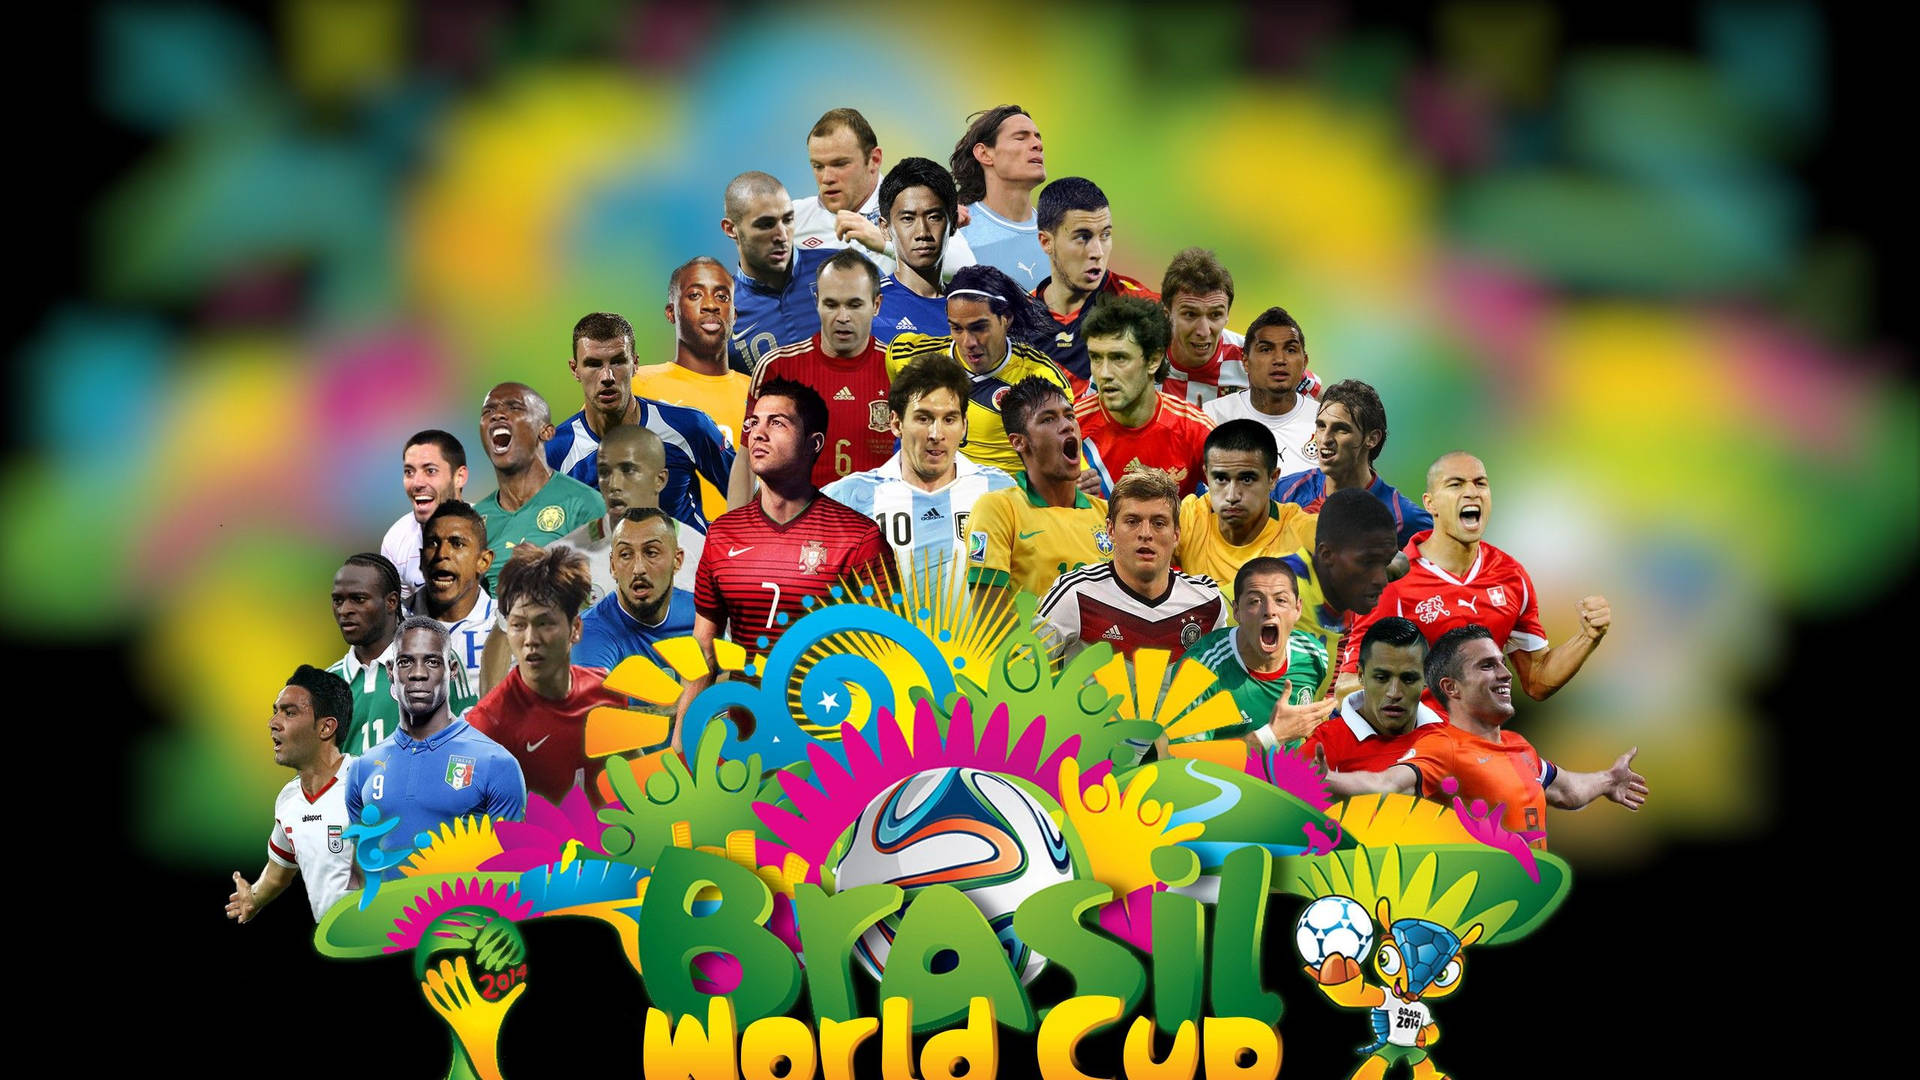 World Cup Background Wallpaper